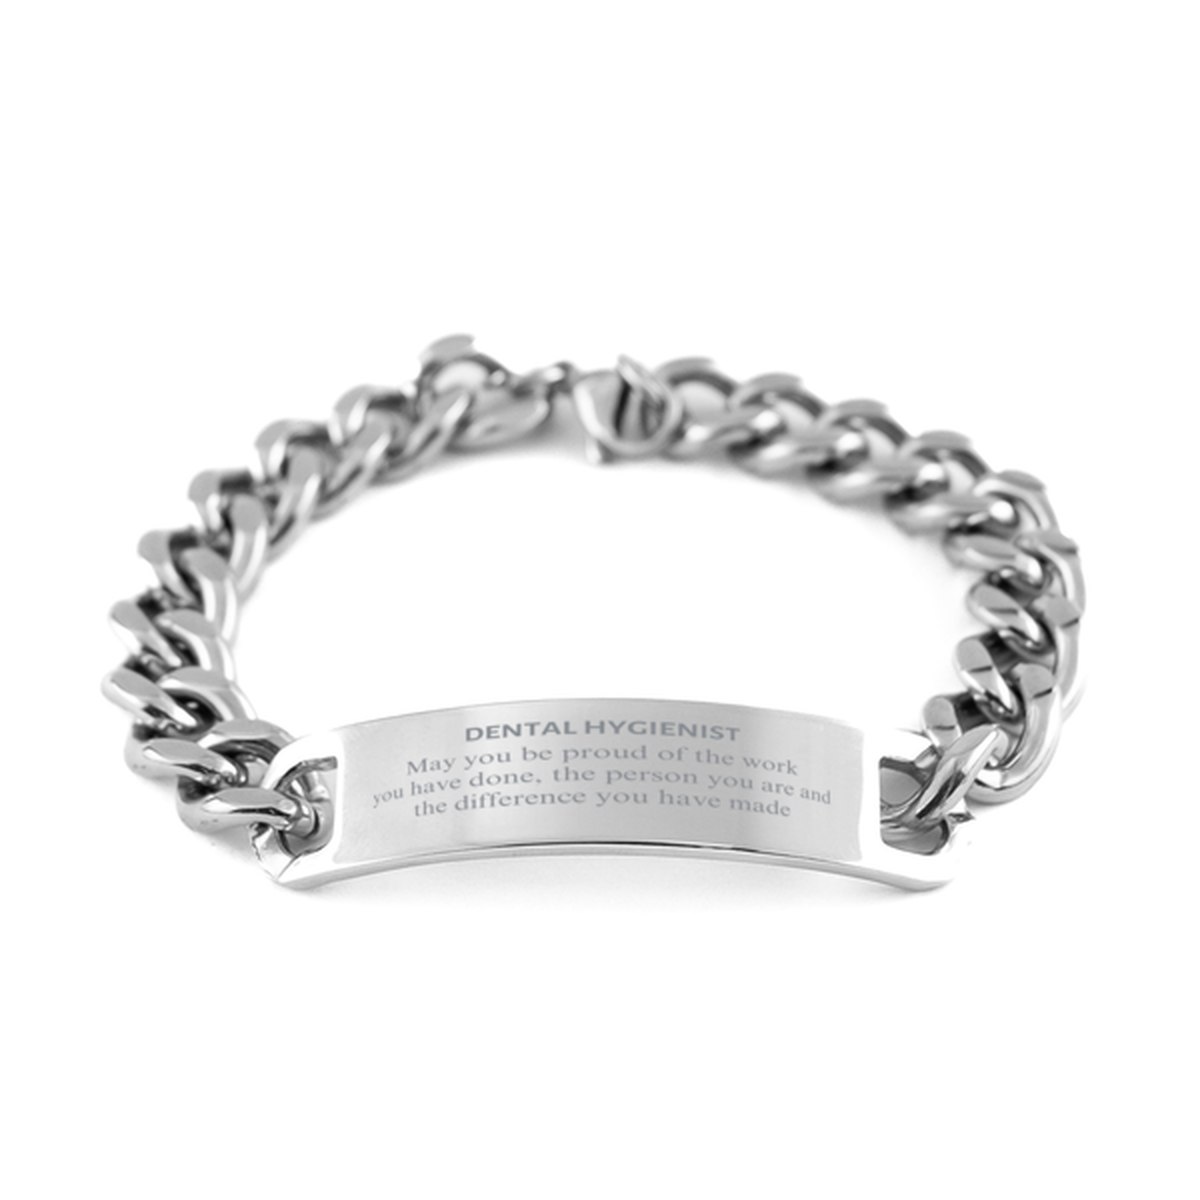 Dental Hygienist May you be proud of the work you have done, Retirement Dental Hygienist Cuban Chain Stainless Steel Bracelet for Colleague Appreciation Gifts Amazing for Dental Hygienist